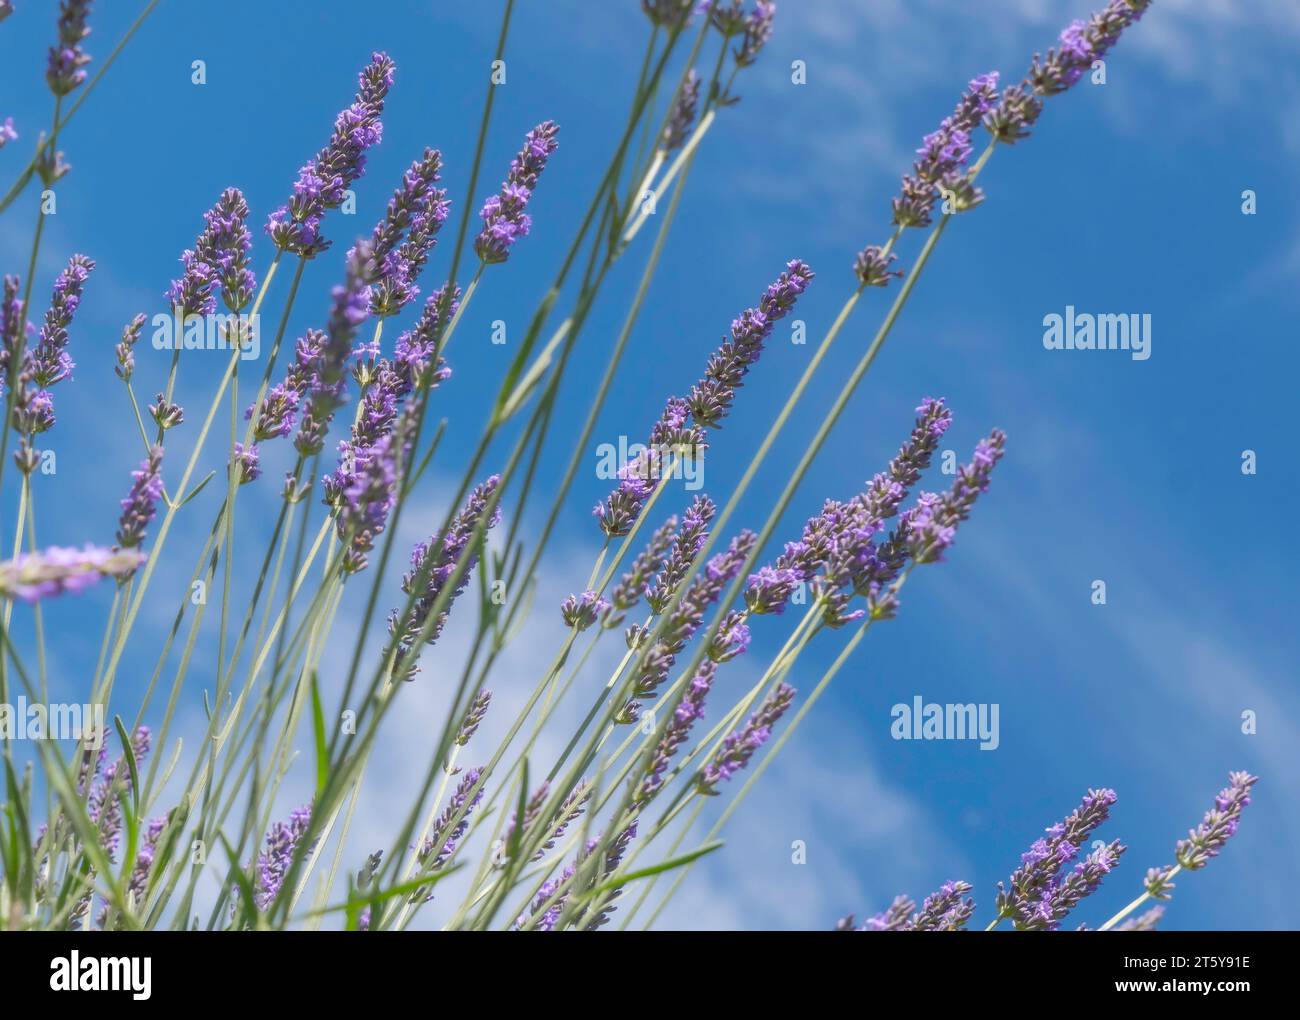 Fields of lavender in bloom on the Valensole plateau, Provence, South of France. Stock Photo